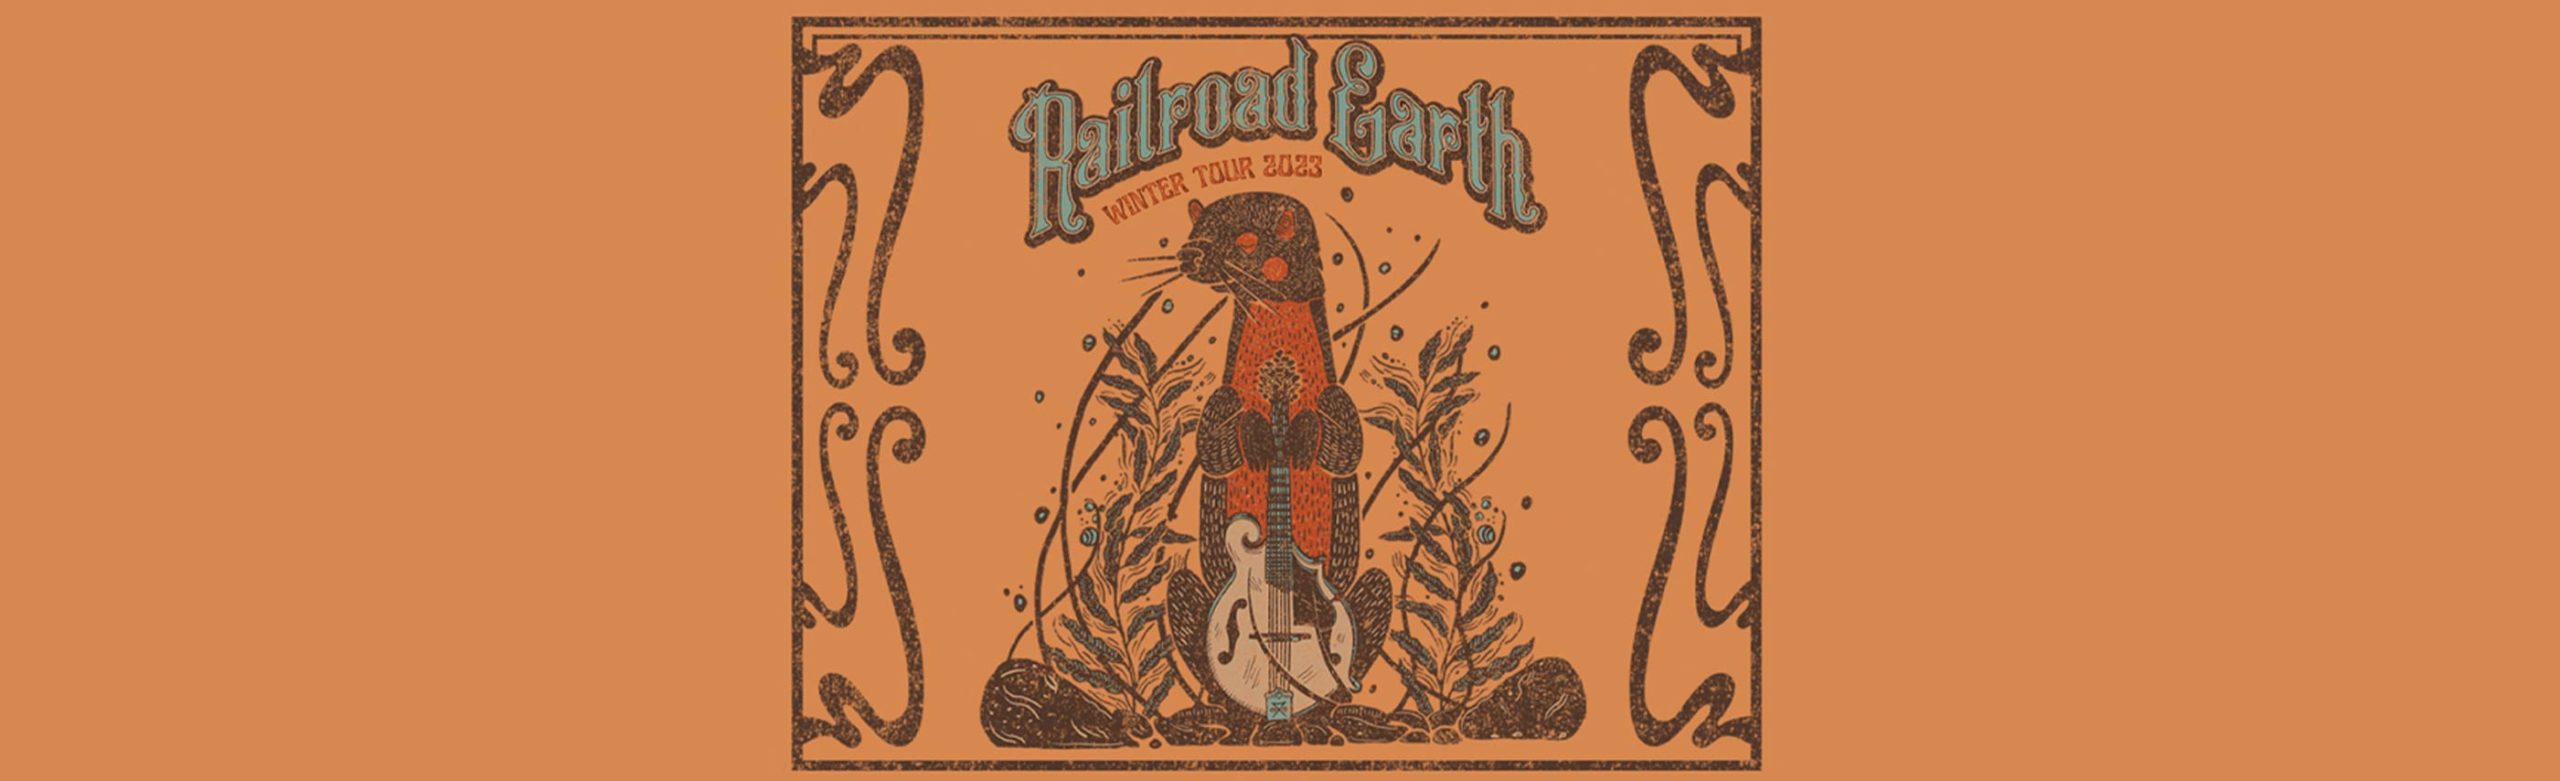 Railroad Earth Confirms Return to Montana in 2023 Image